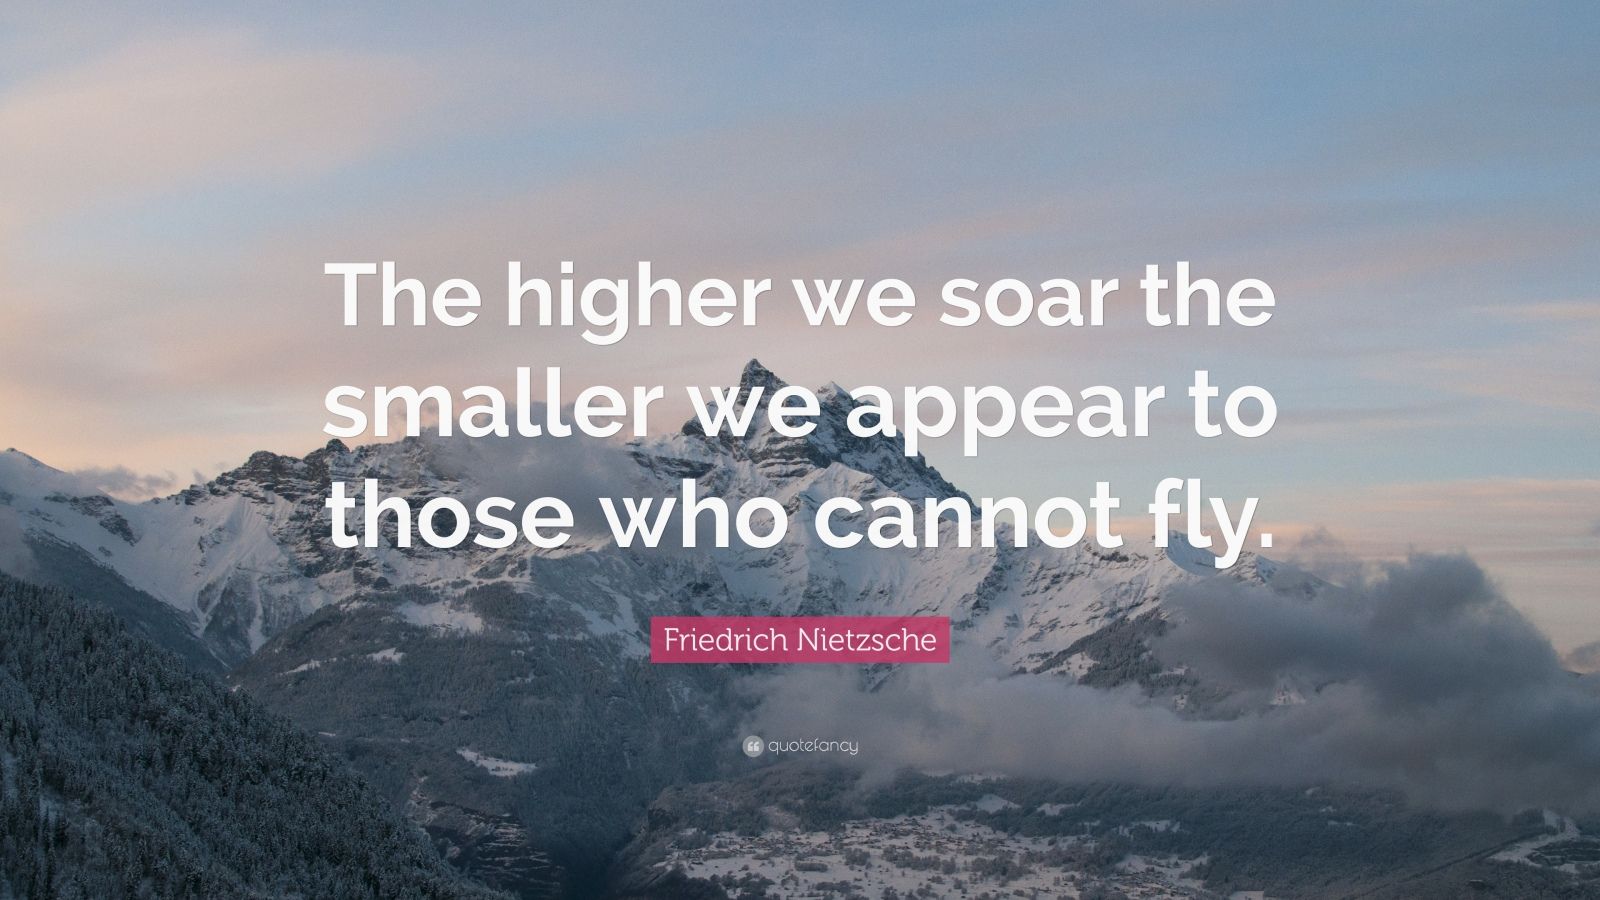 Friedrich Nietzsche Quote: “The higher we soar the smaller we appear to ...